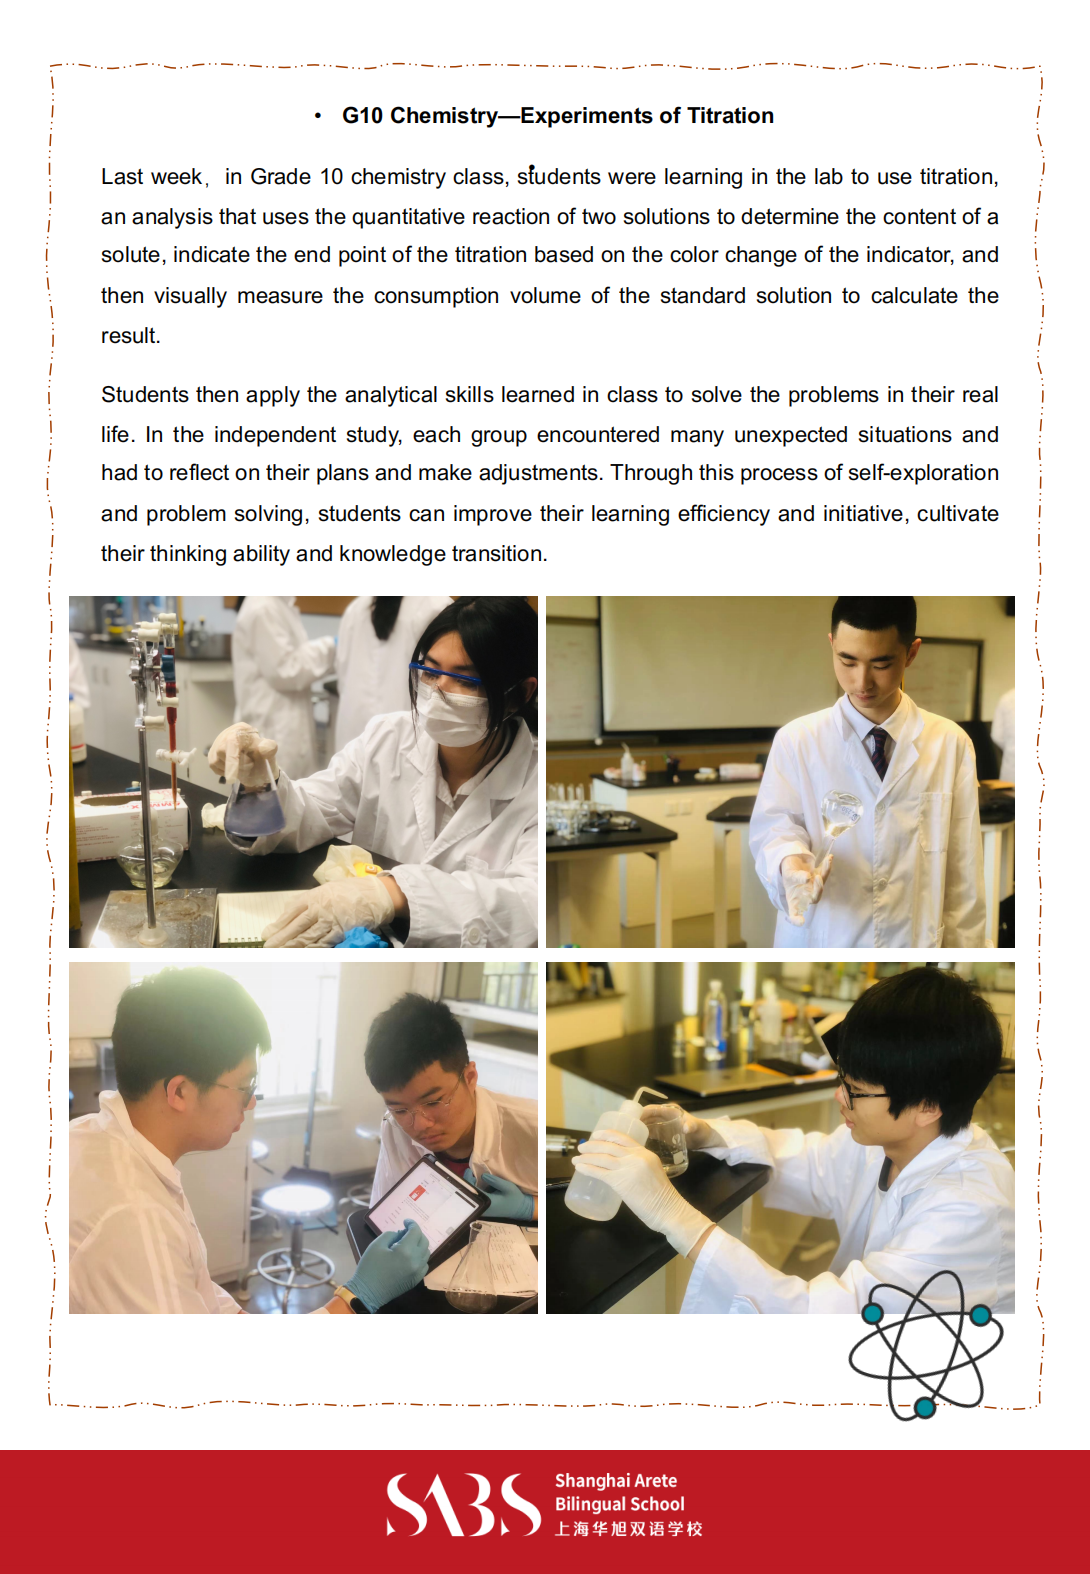 HS 7th Issue Newsletter pptx（English)_06.png